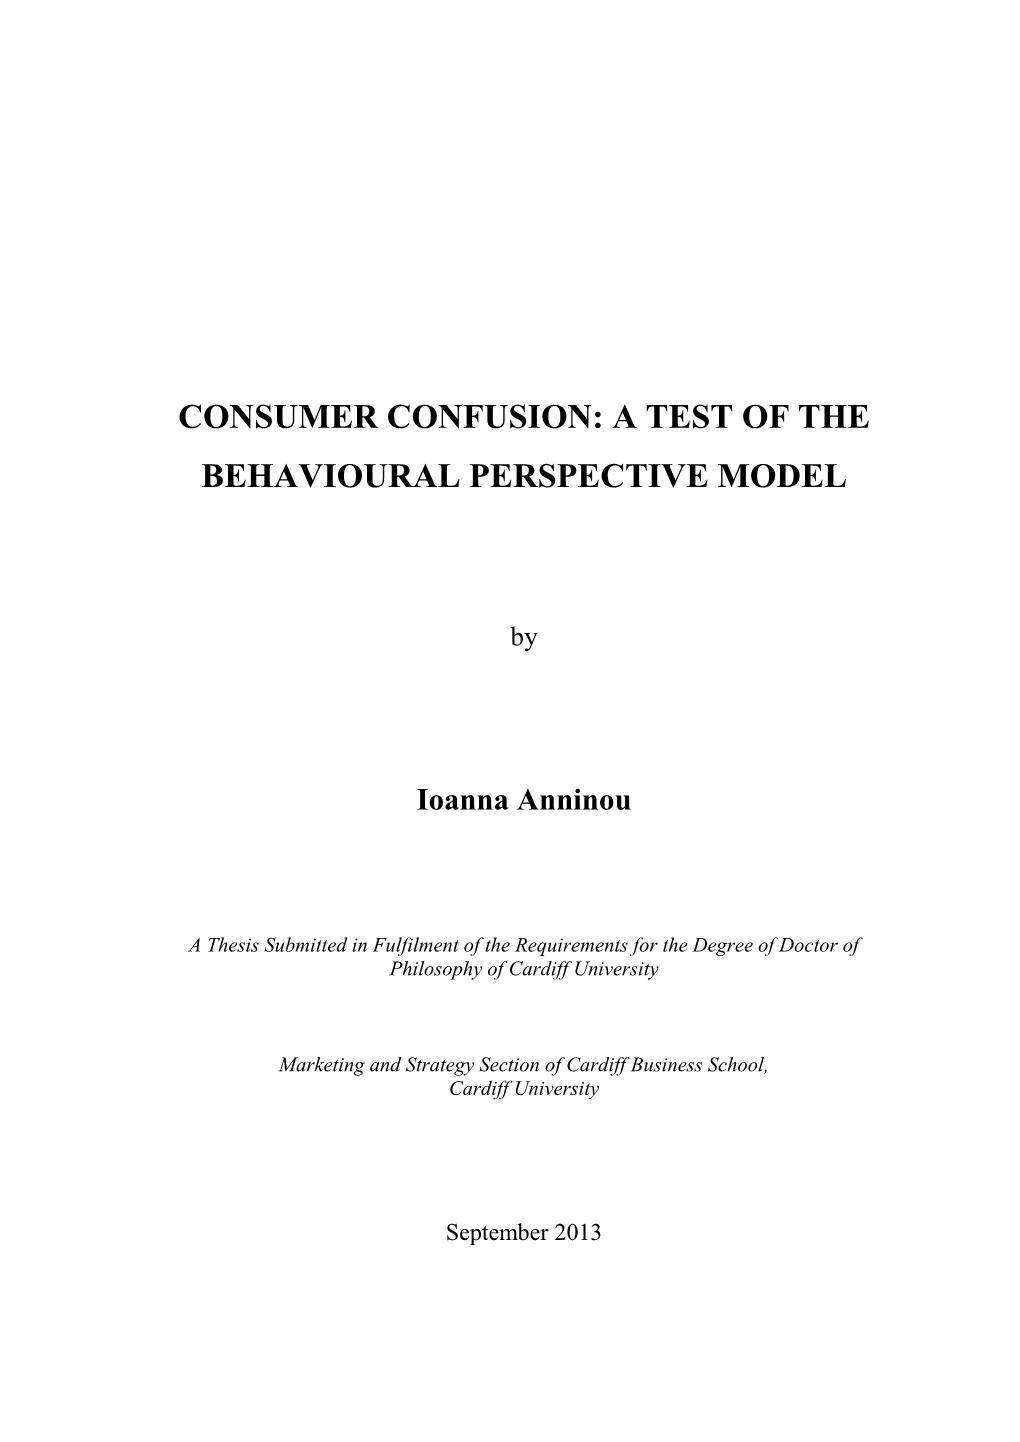 Consumer Confusion: a Test of the Behavioural Perspective Model